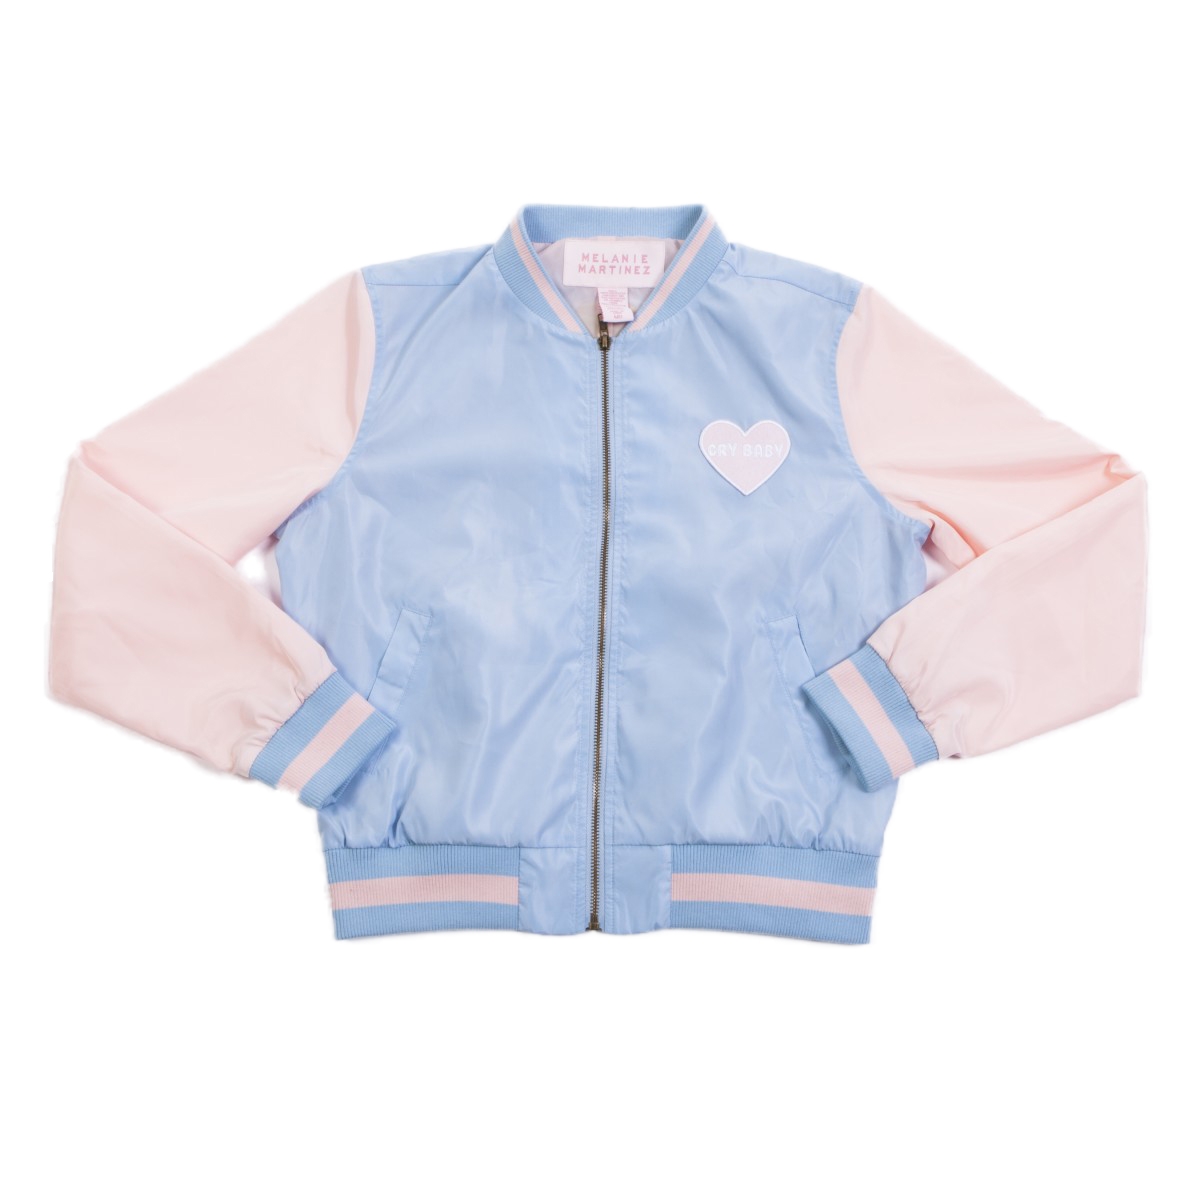 Crybaby Portrait Bomber Jacket | Warner Music Official Store